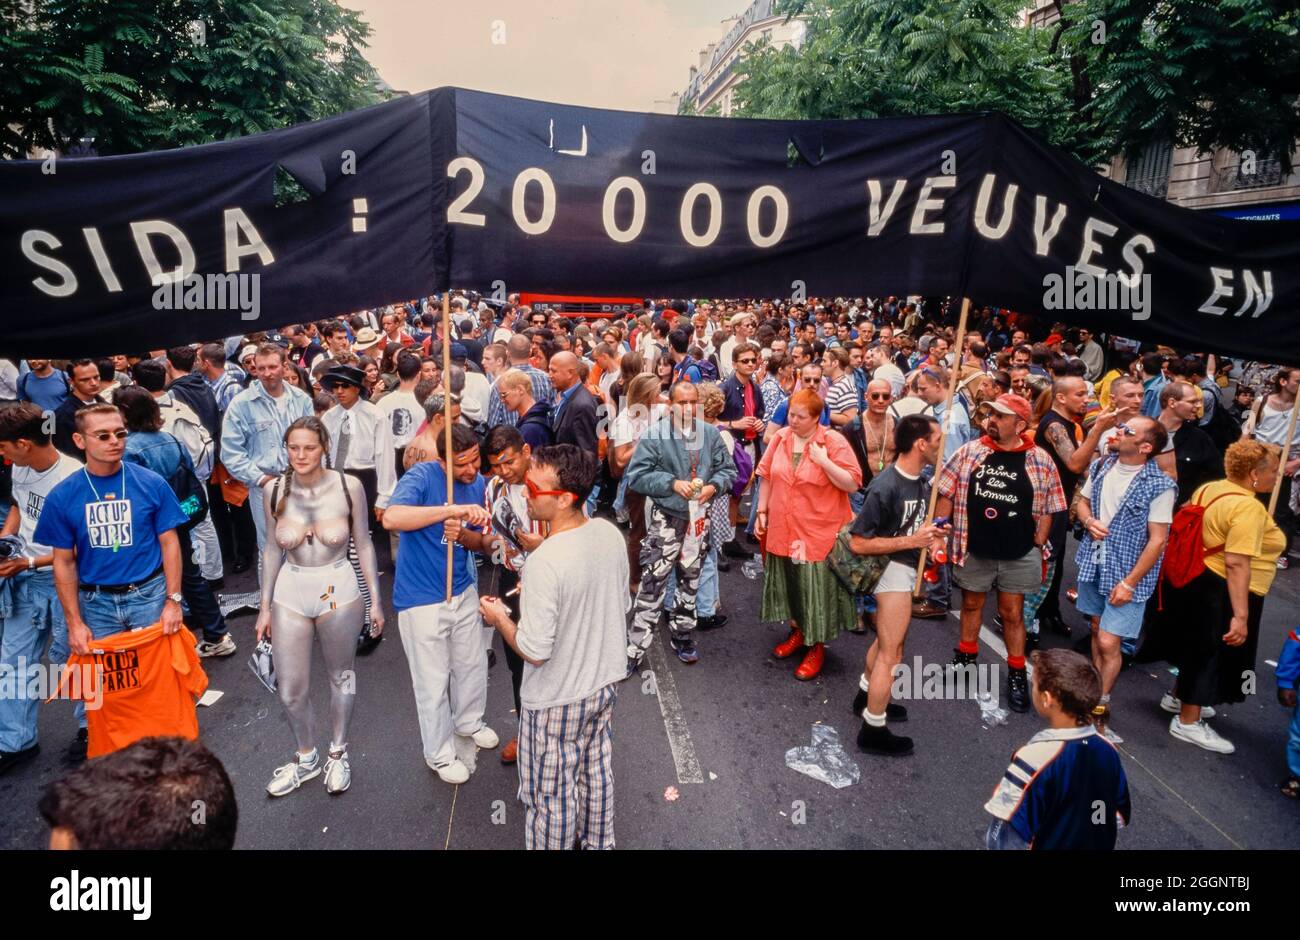 Crowd Protest of People, young lesbians and gay men, AIDS Activists of Act Up PAris Demonstrating on Street, 'Gay Pride' 1996, Queer activism, sign: 'AIDS: 20,000 Angry Widows' Stock Photo